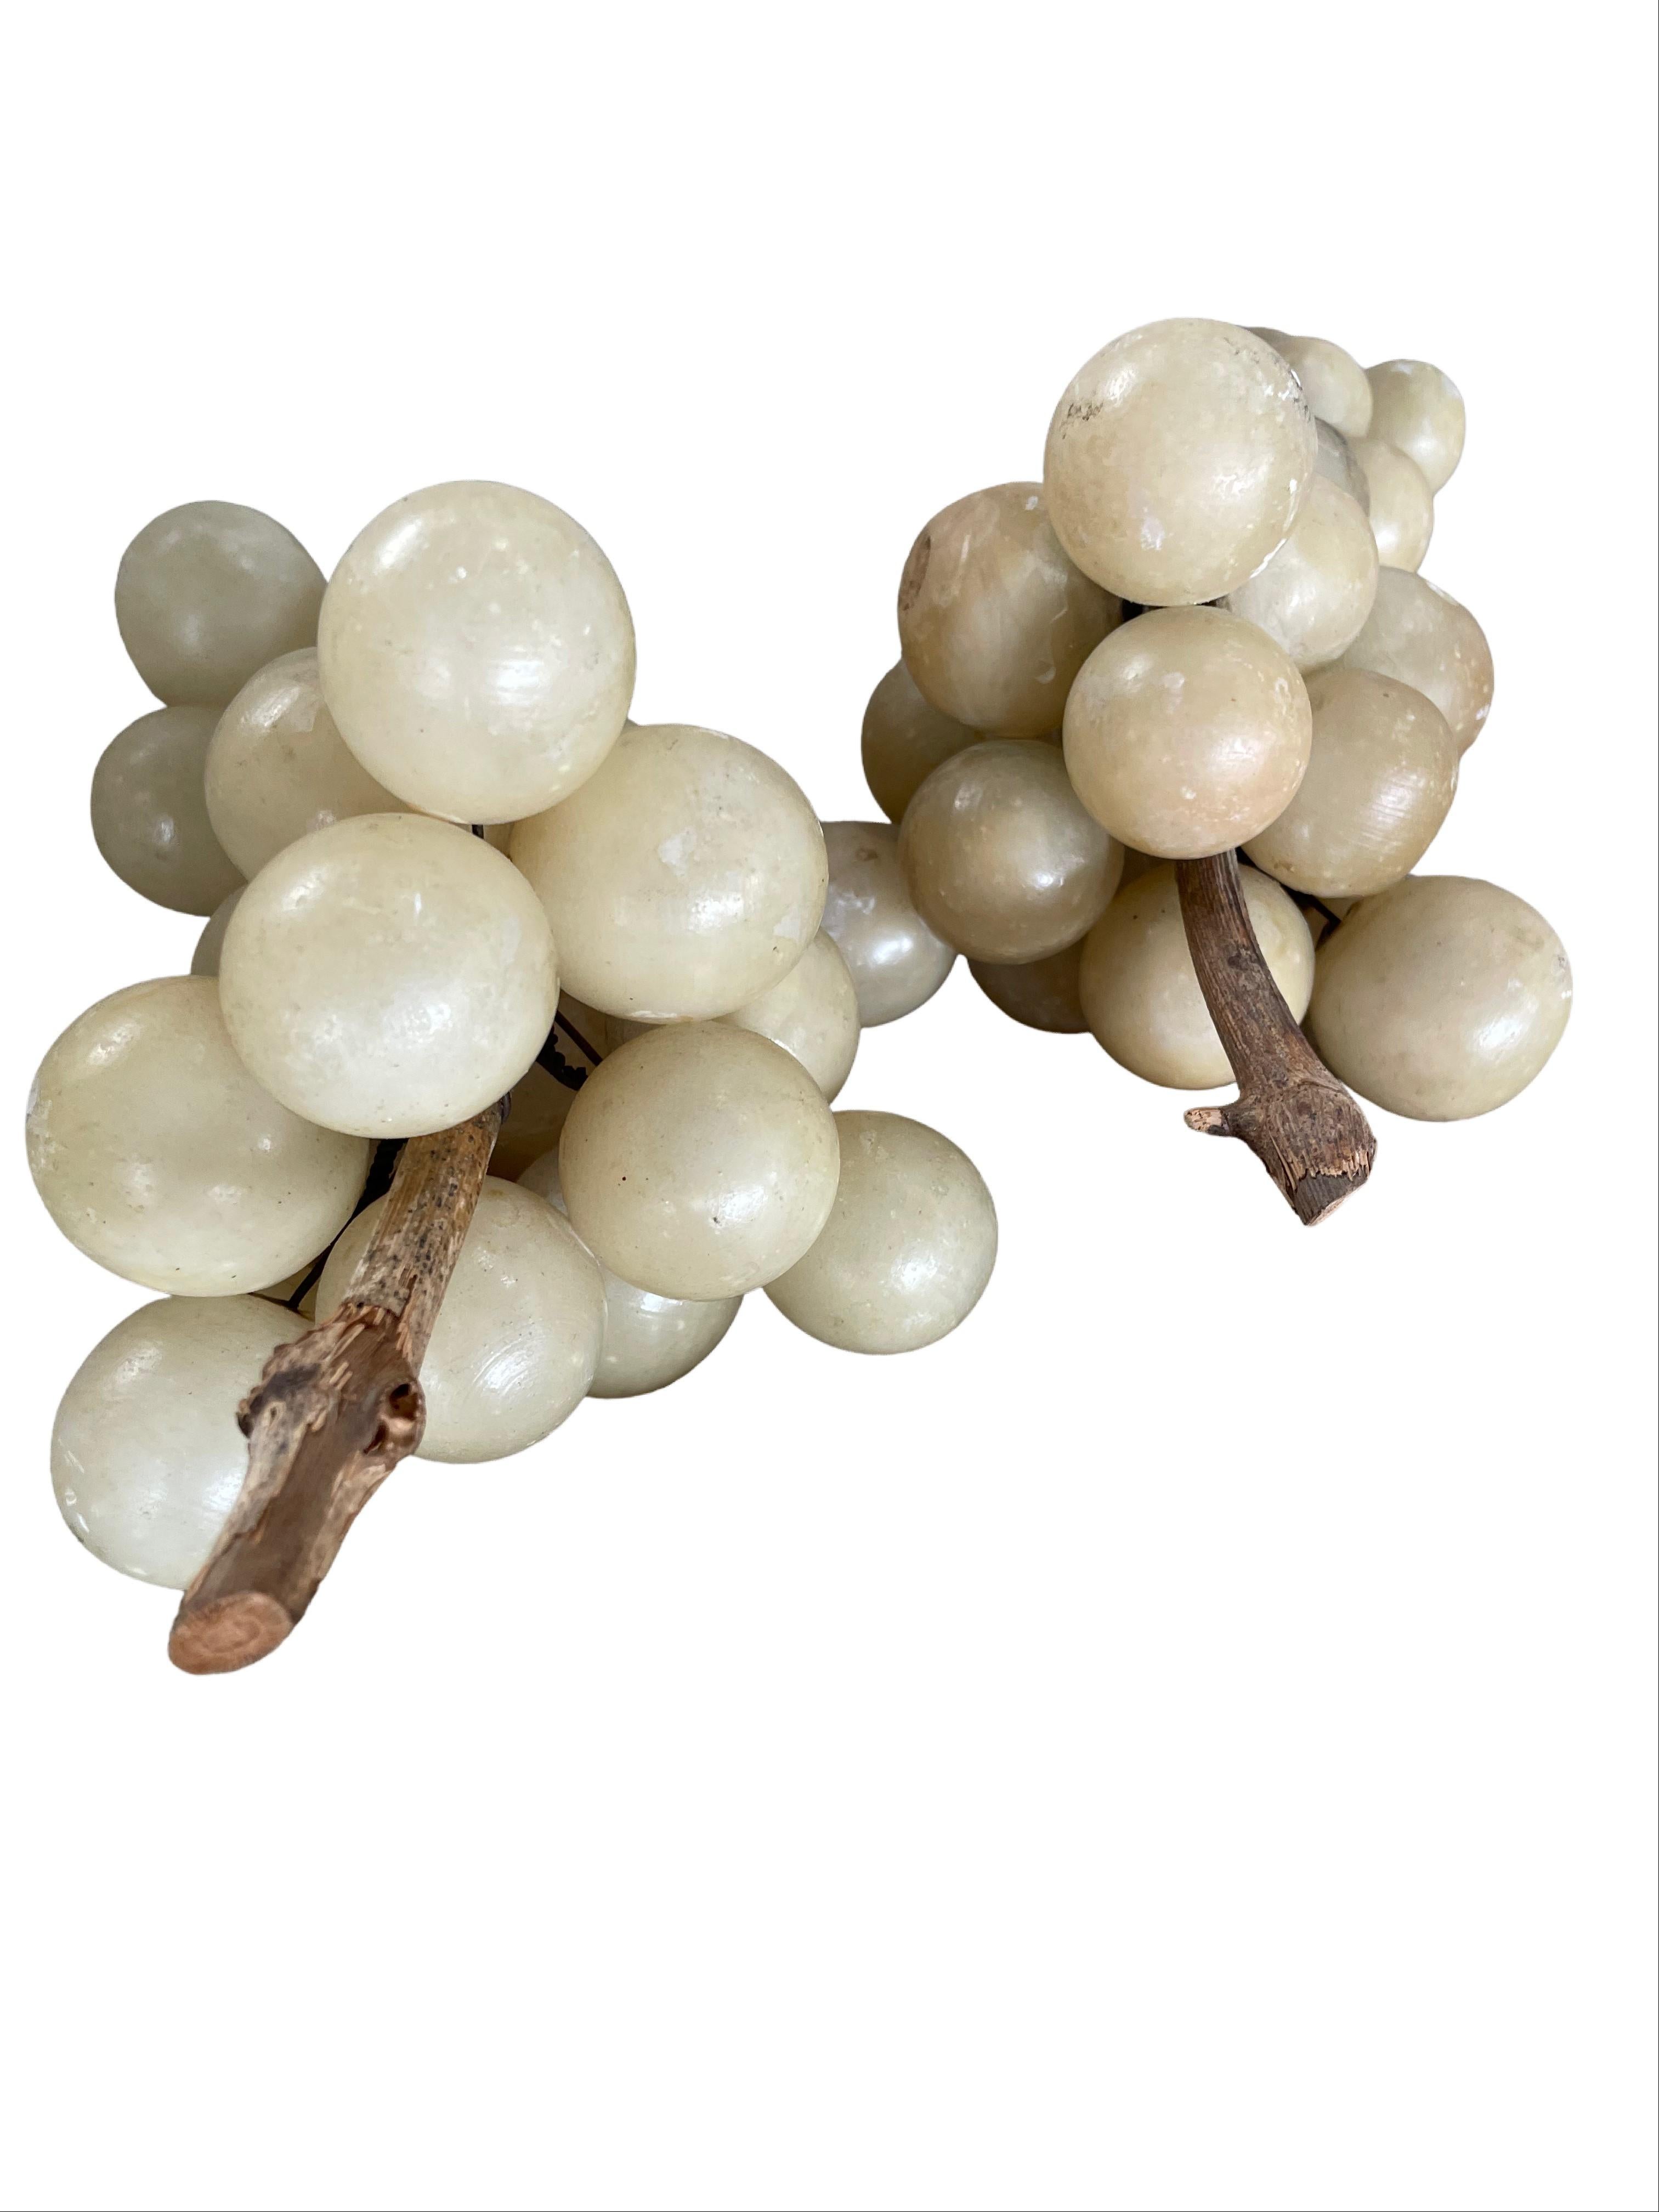 This set of Mid-century handcrafted alabaster grape clusters with wood stems transports one to the vineyards of Italy. Consisting of two large and three small clusters, the rich warm hues of alabaster stone paired with the authentic wooden stems,